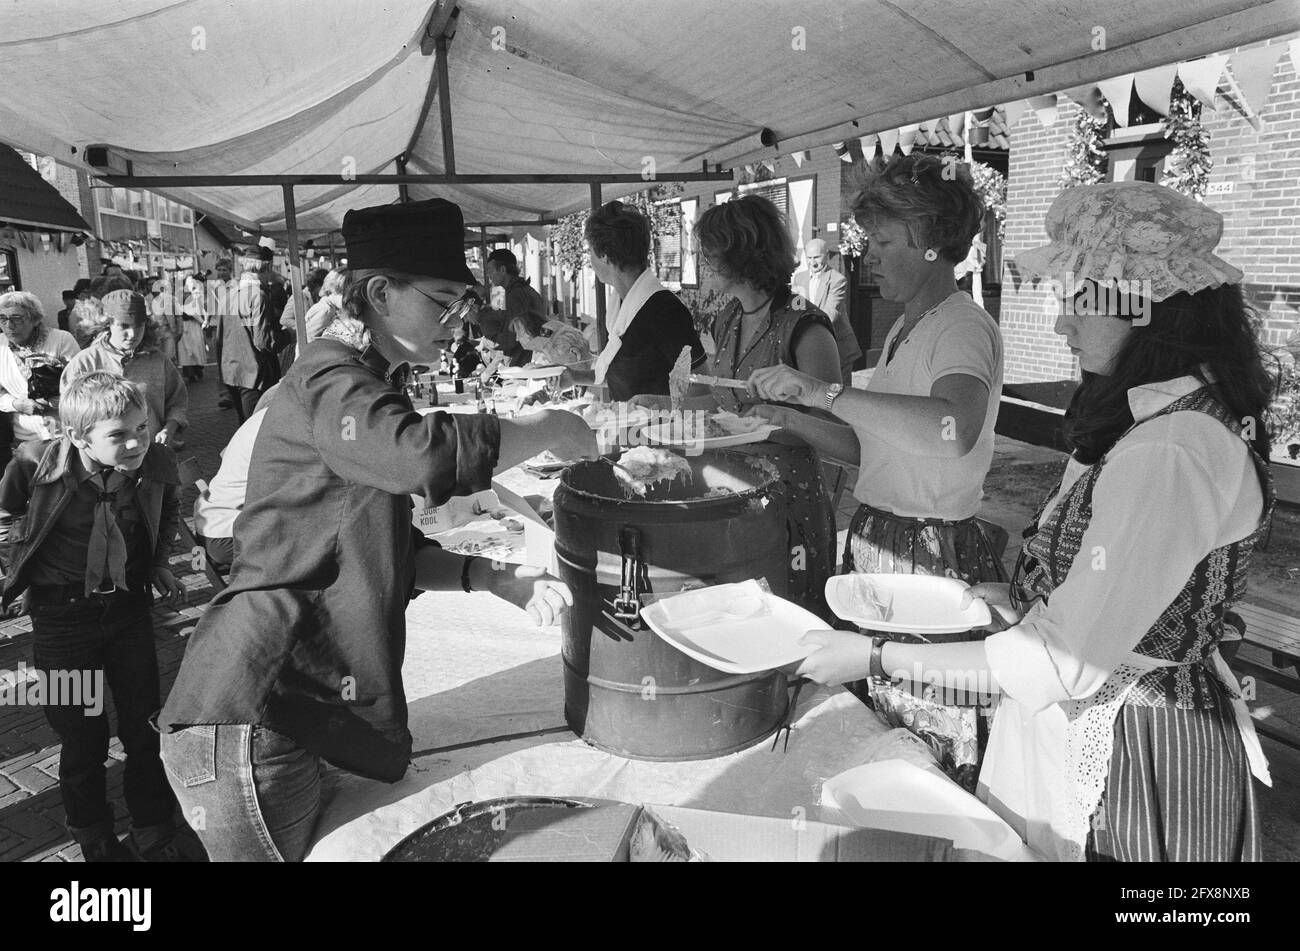 Residents of Langedijk and surrounding villages participate in this massive food-fest in honor of 900th anniversary of Langendijk, September 7, 1980, meals, sauerkraut, The Netherlands, 20th century press agency photo, news to remember, documentary, historic photography 1945-1990, visual stories, human history of the Twentieth Century, capturing moments in time Stock Photo